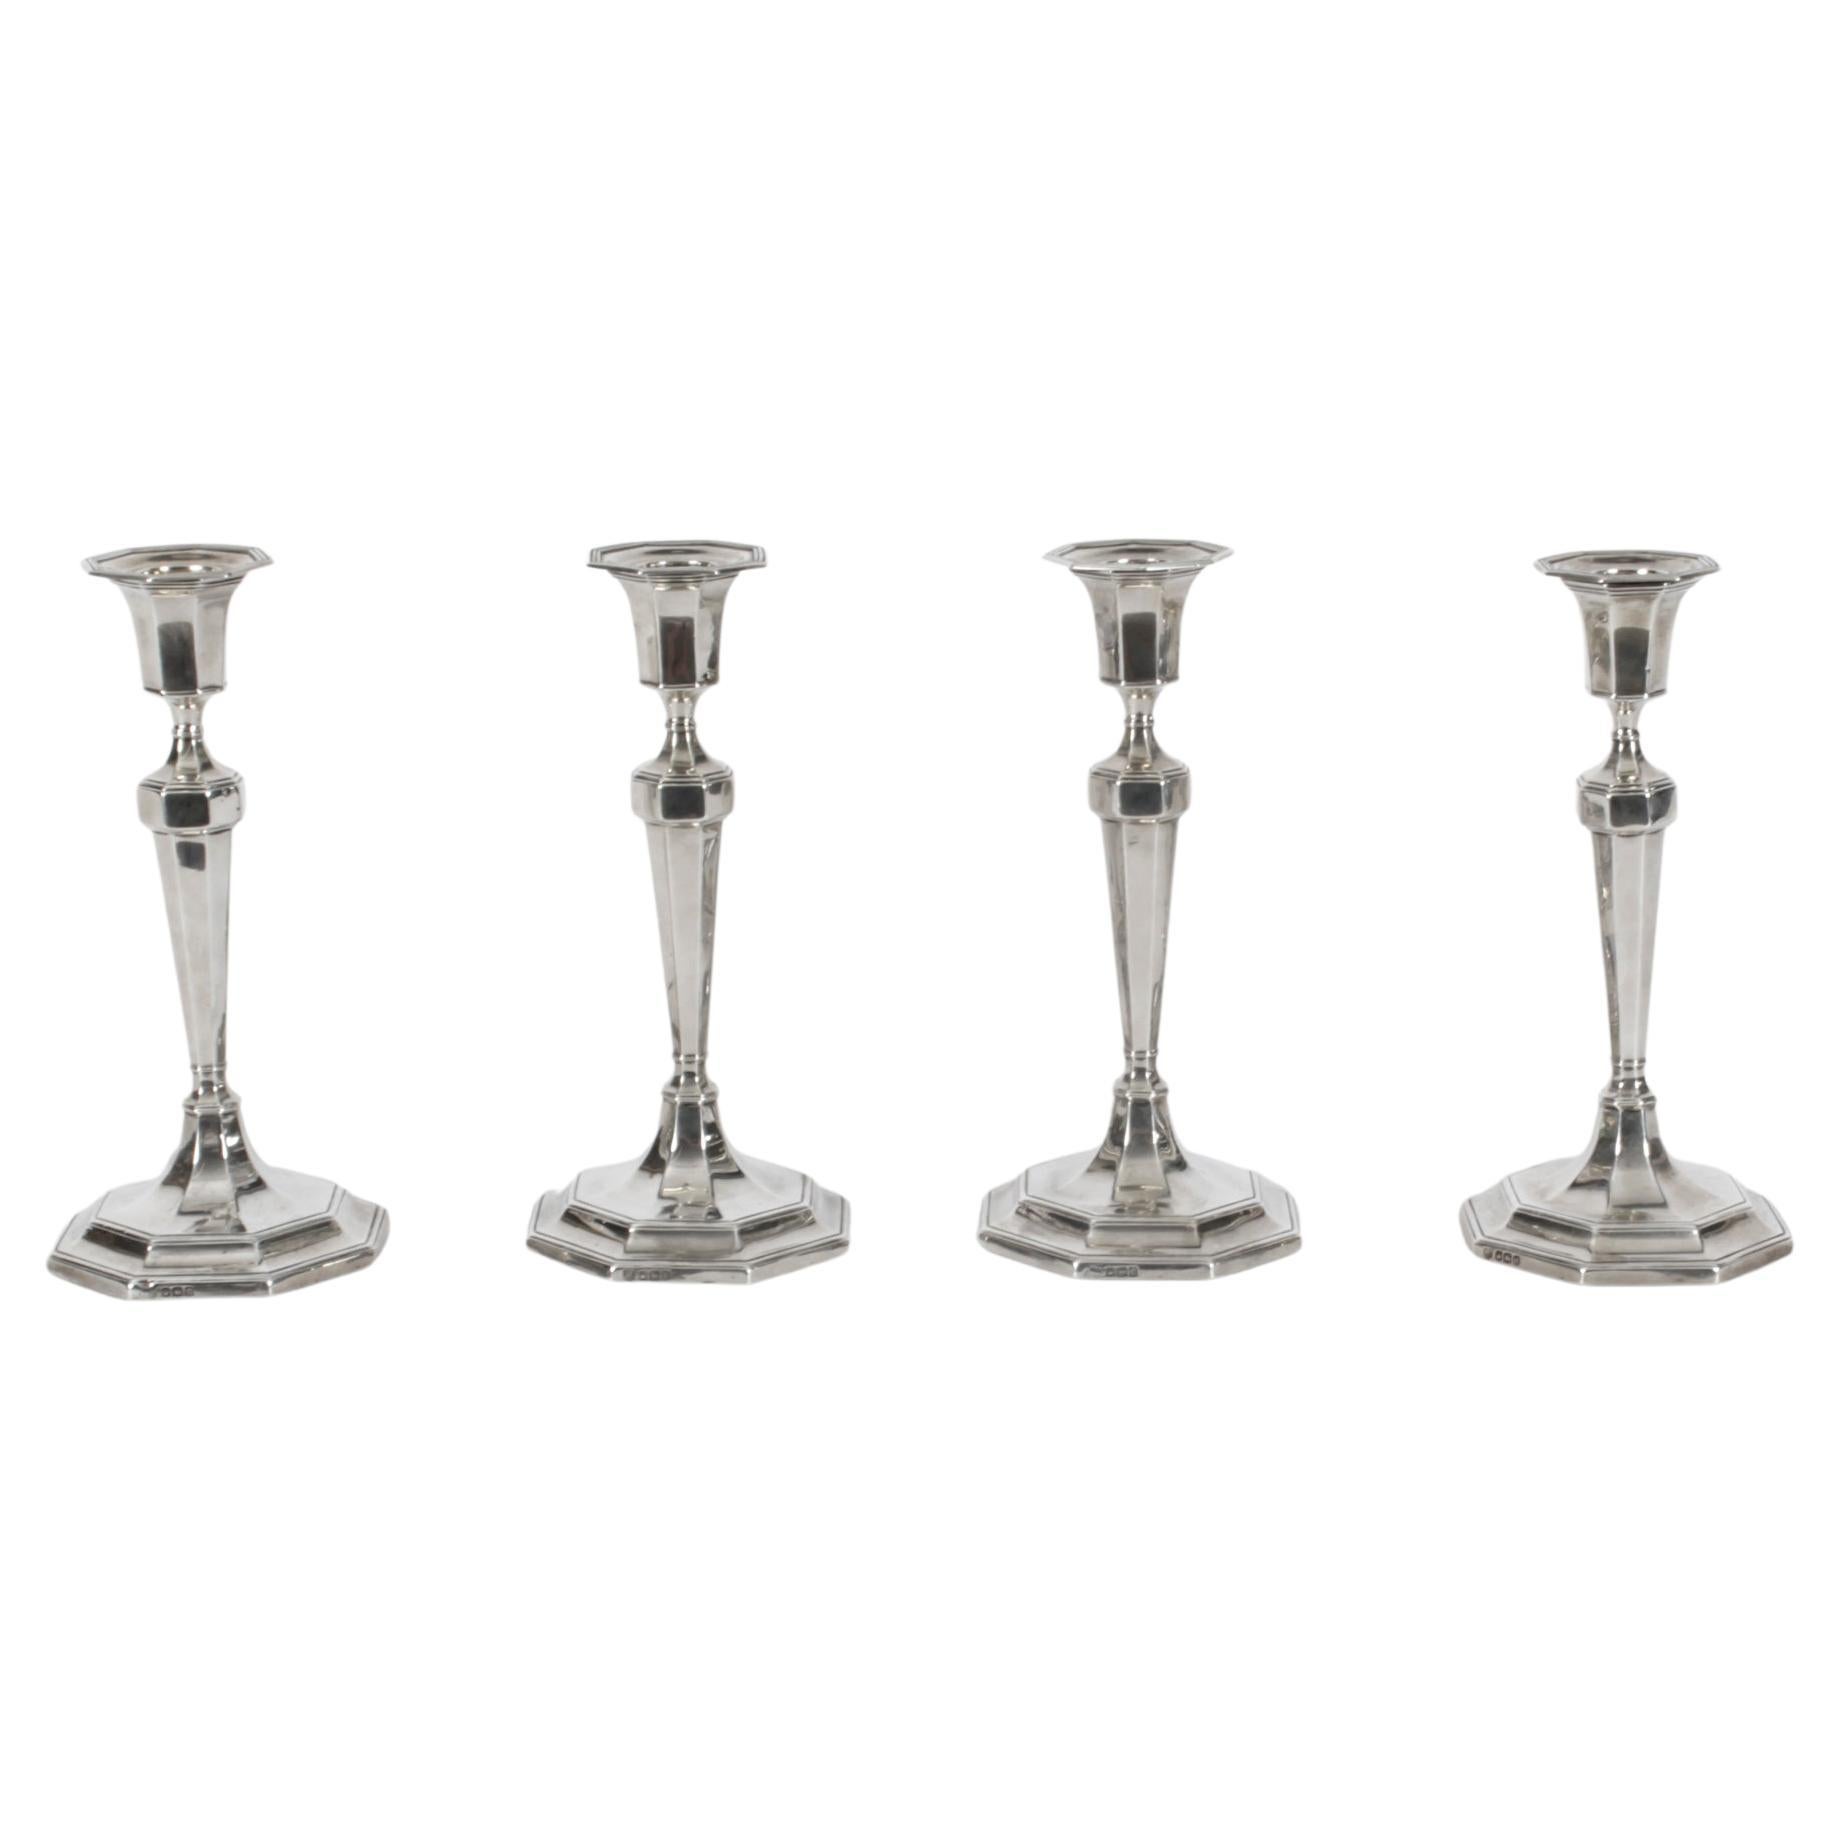 Antique Set 4 Sterling Silver Candlesticks by Hawkesworth Eyre & Co, 1920